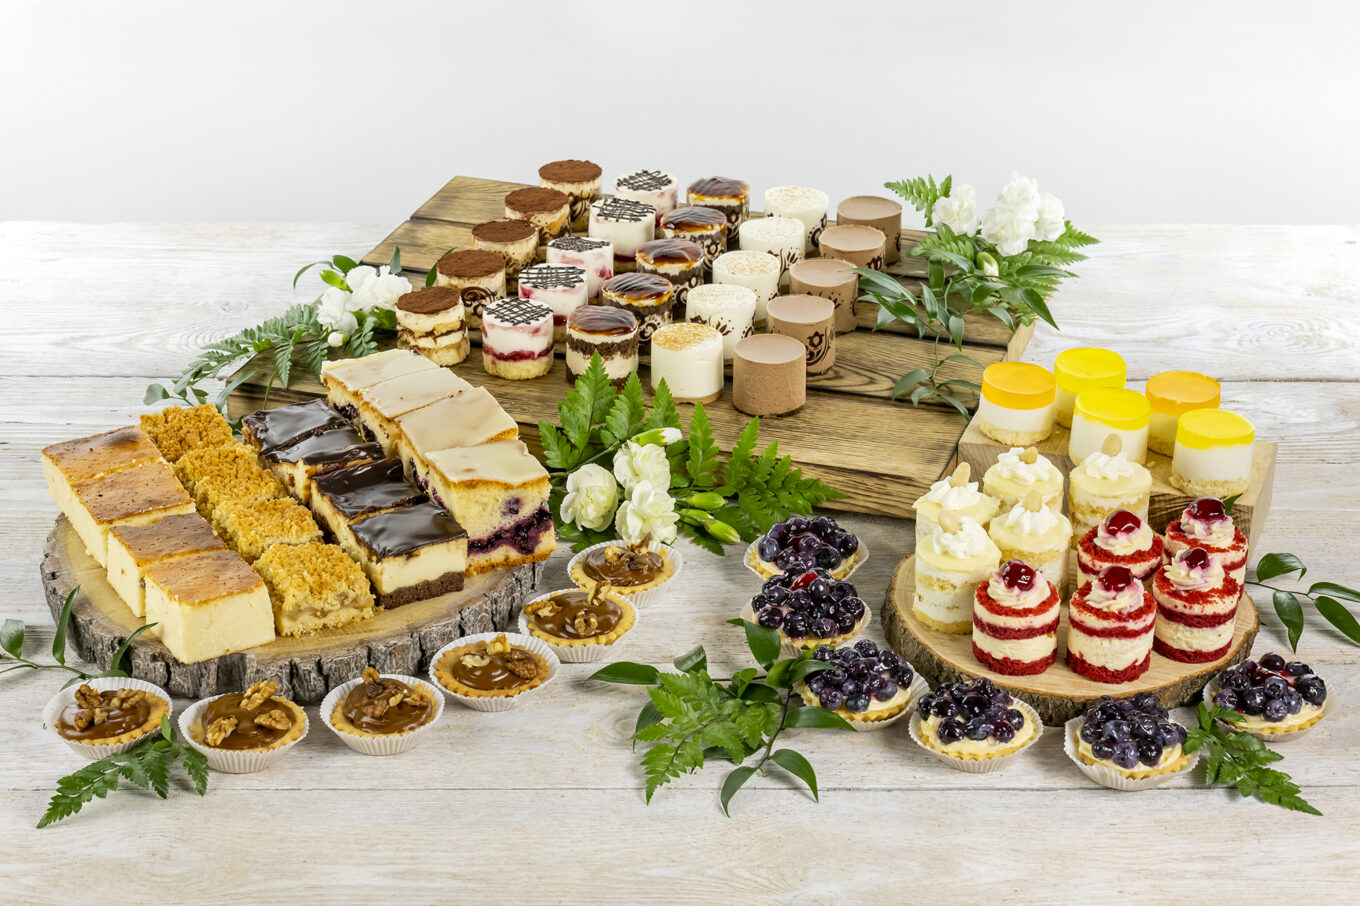 sweet nano buffet Cukiernia Jacek Placek is synonymous with the taste of homemade cakes made from natural products.